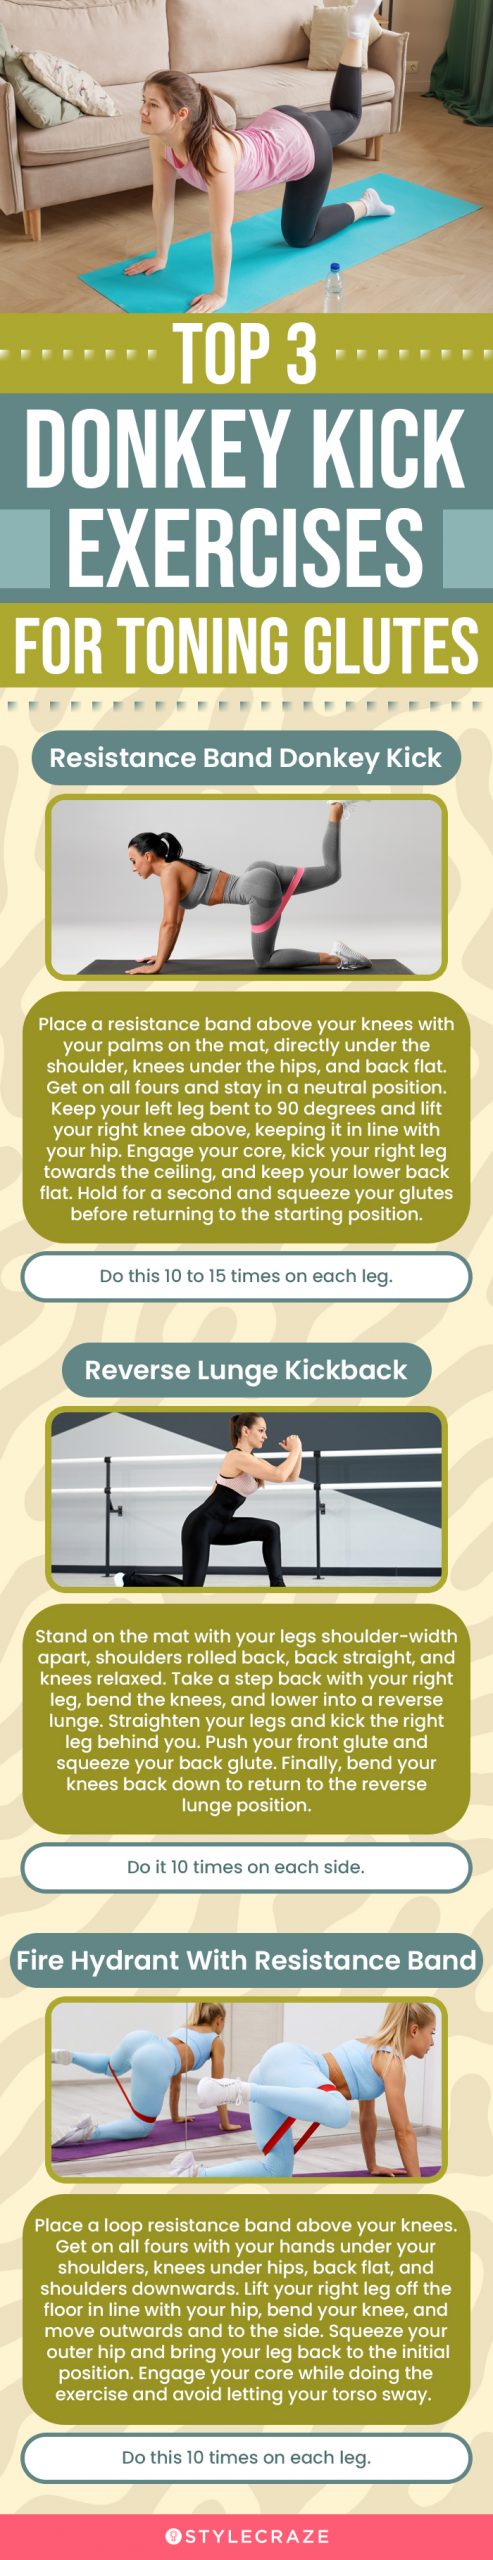 top 3 donkey kick exercises for toning glutes(infographic)